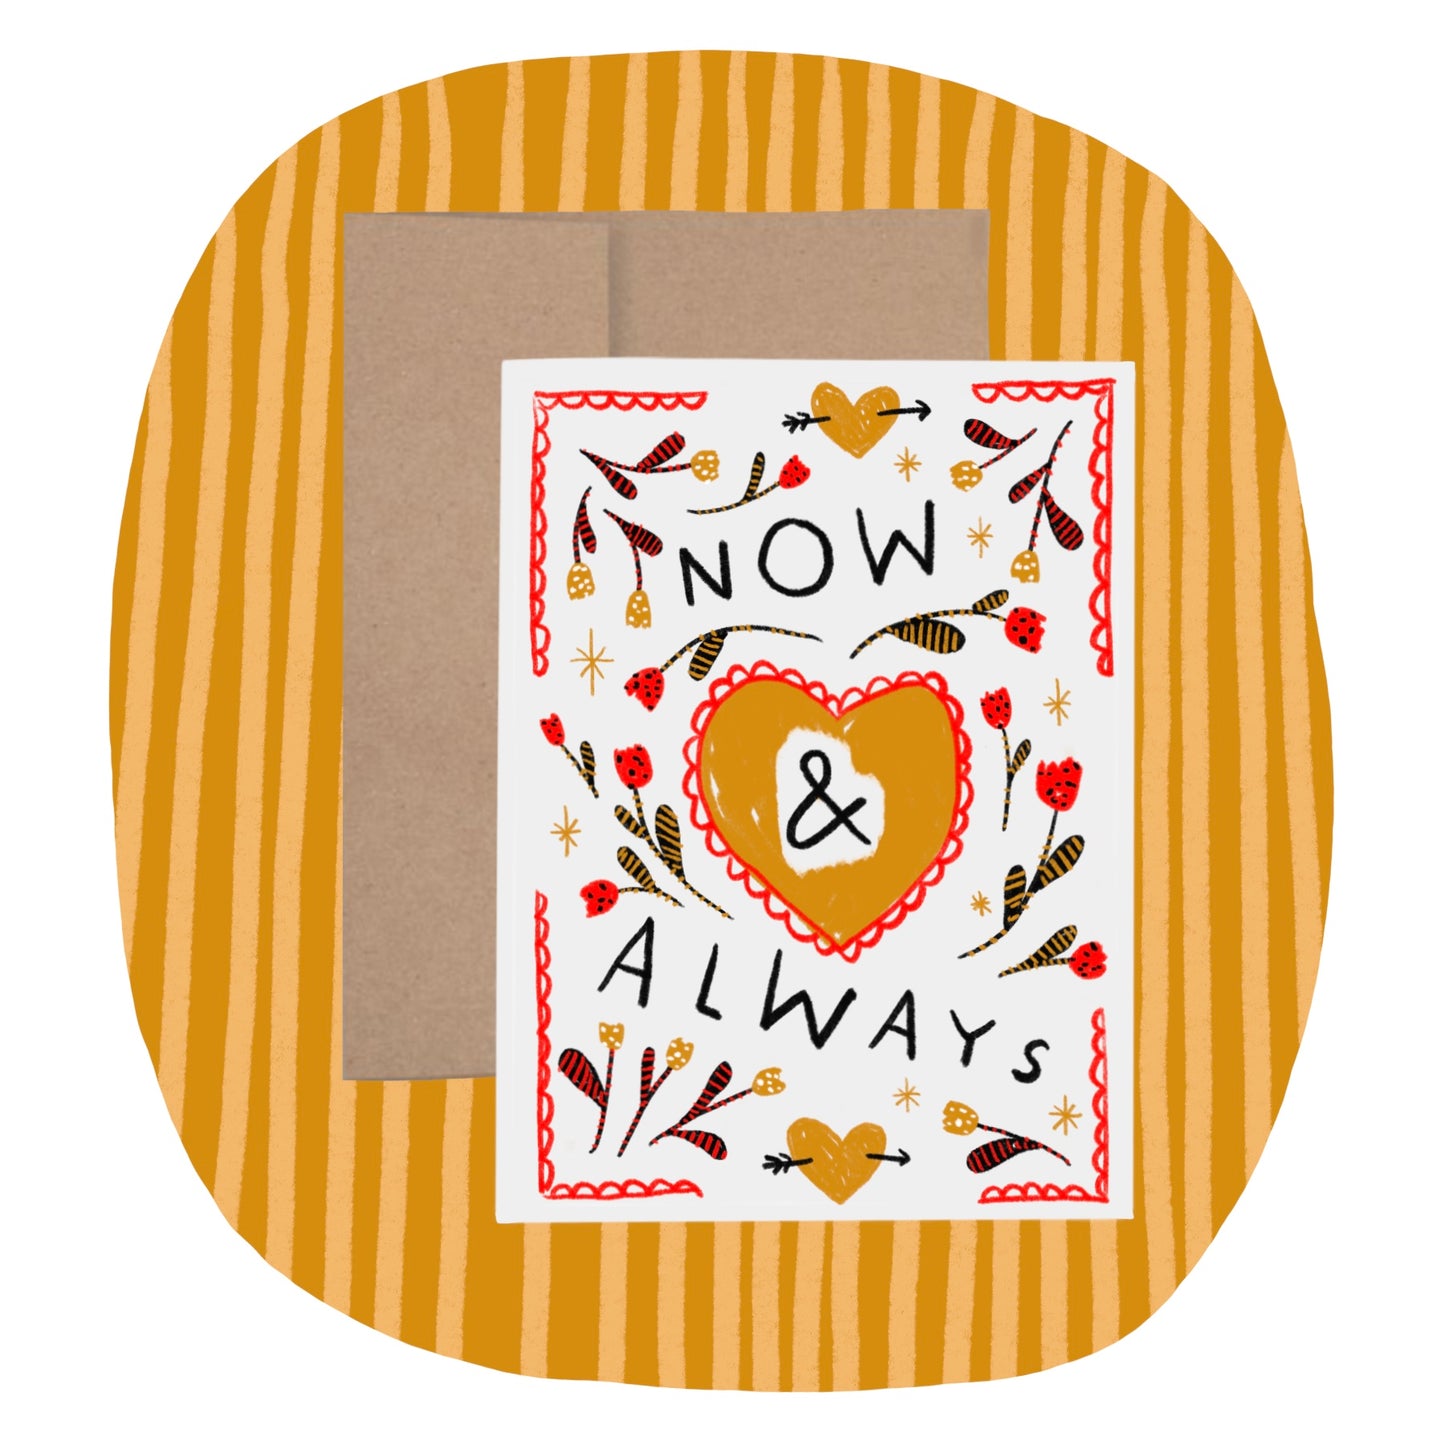 NOW & ALWAYS Greeting Card